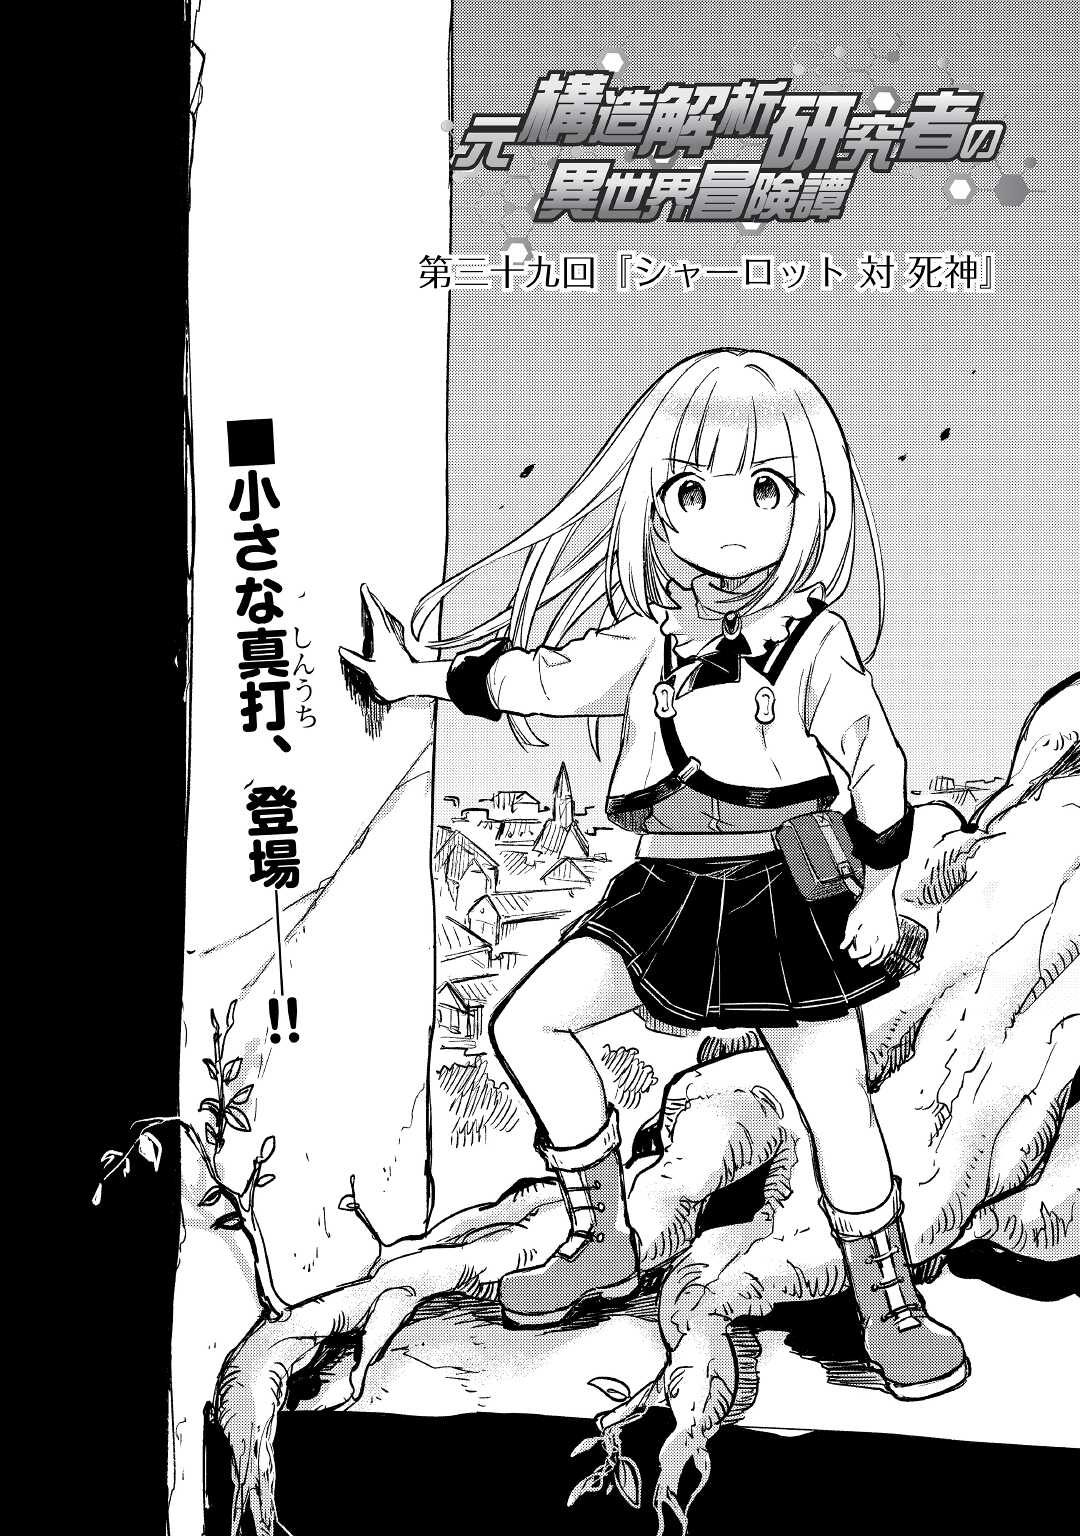 The Former Structural Researcher’s Story of Otherworldly Adventure 第39話 - Page 1